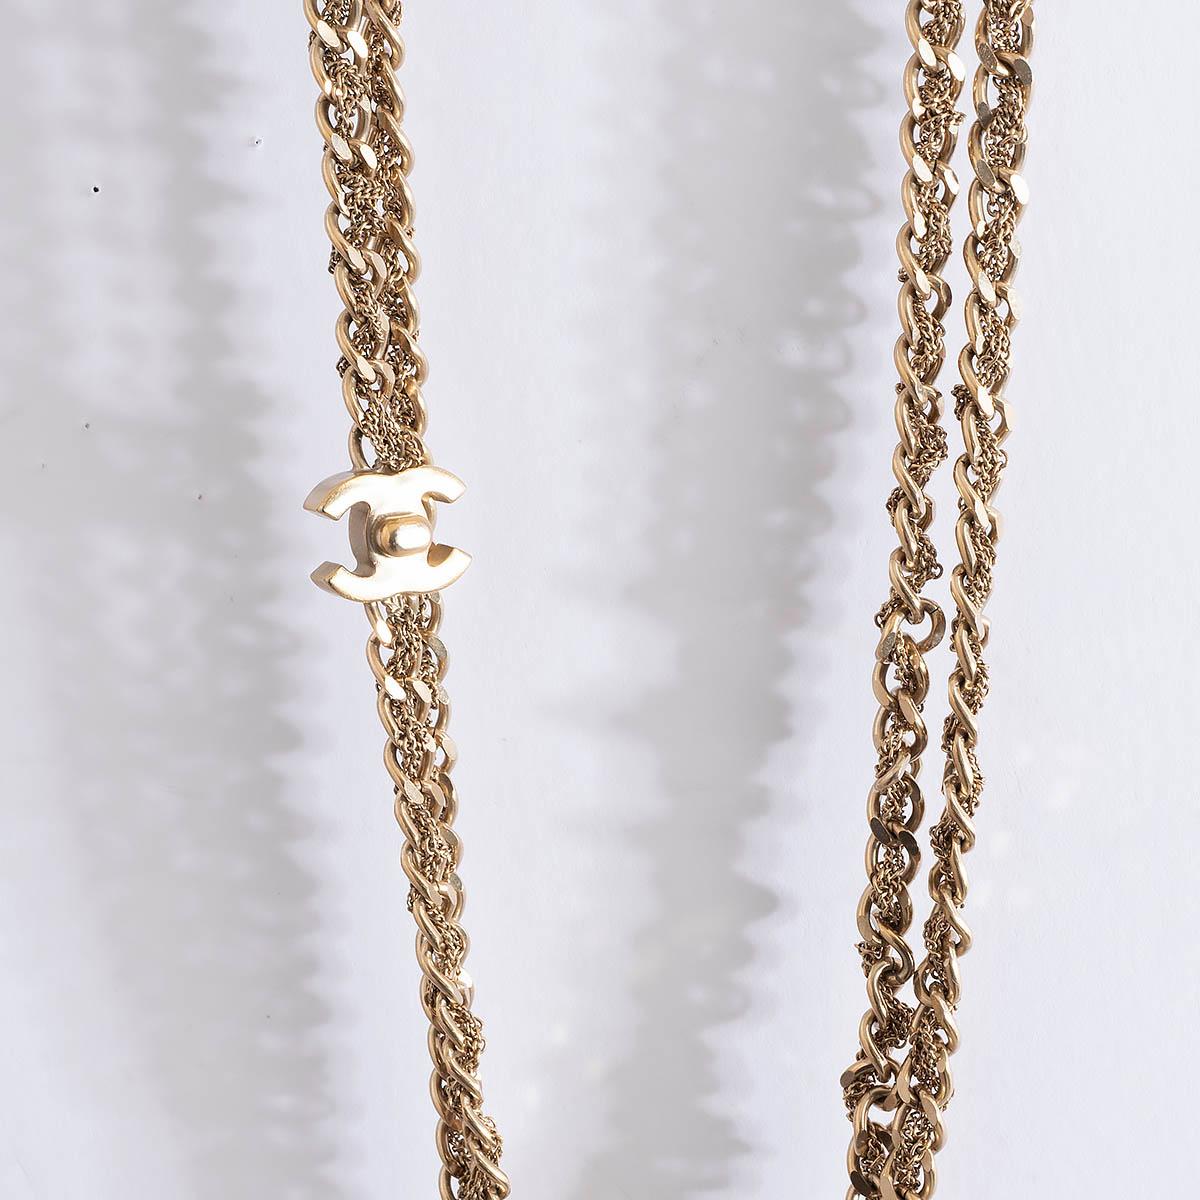 100% authentic Chanel 2012 CC faux turnlock interwoven double chain necklace in gold-tone brass. Can be worn as a necklace or a belt. Has been worn and is in excellent condition. 

Measurements
Model	12P
Width	1.6cm (0.6in)
Length	100cm